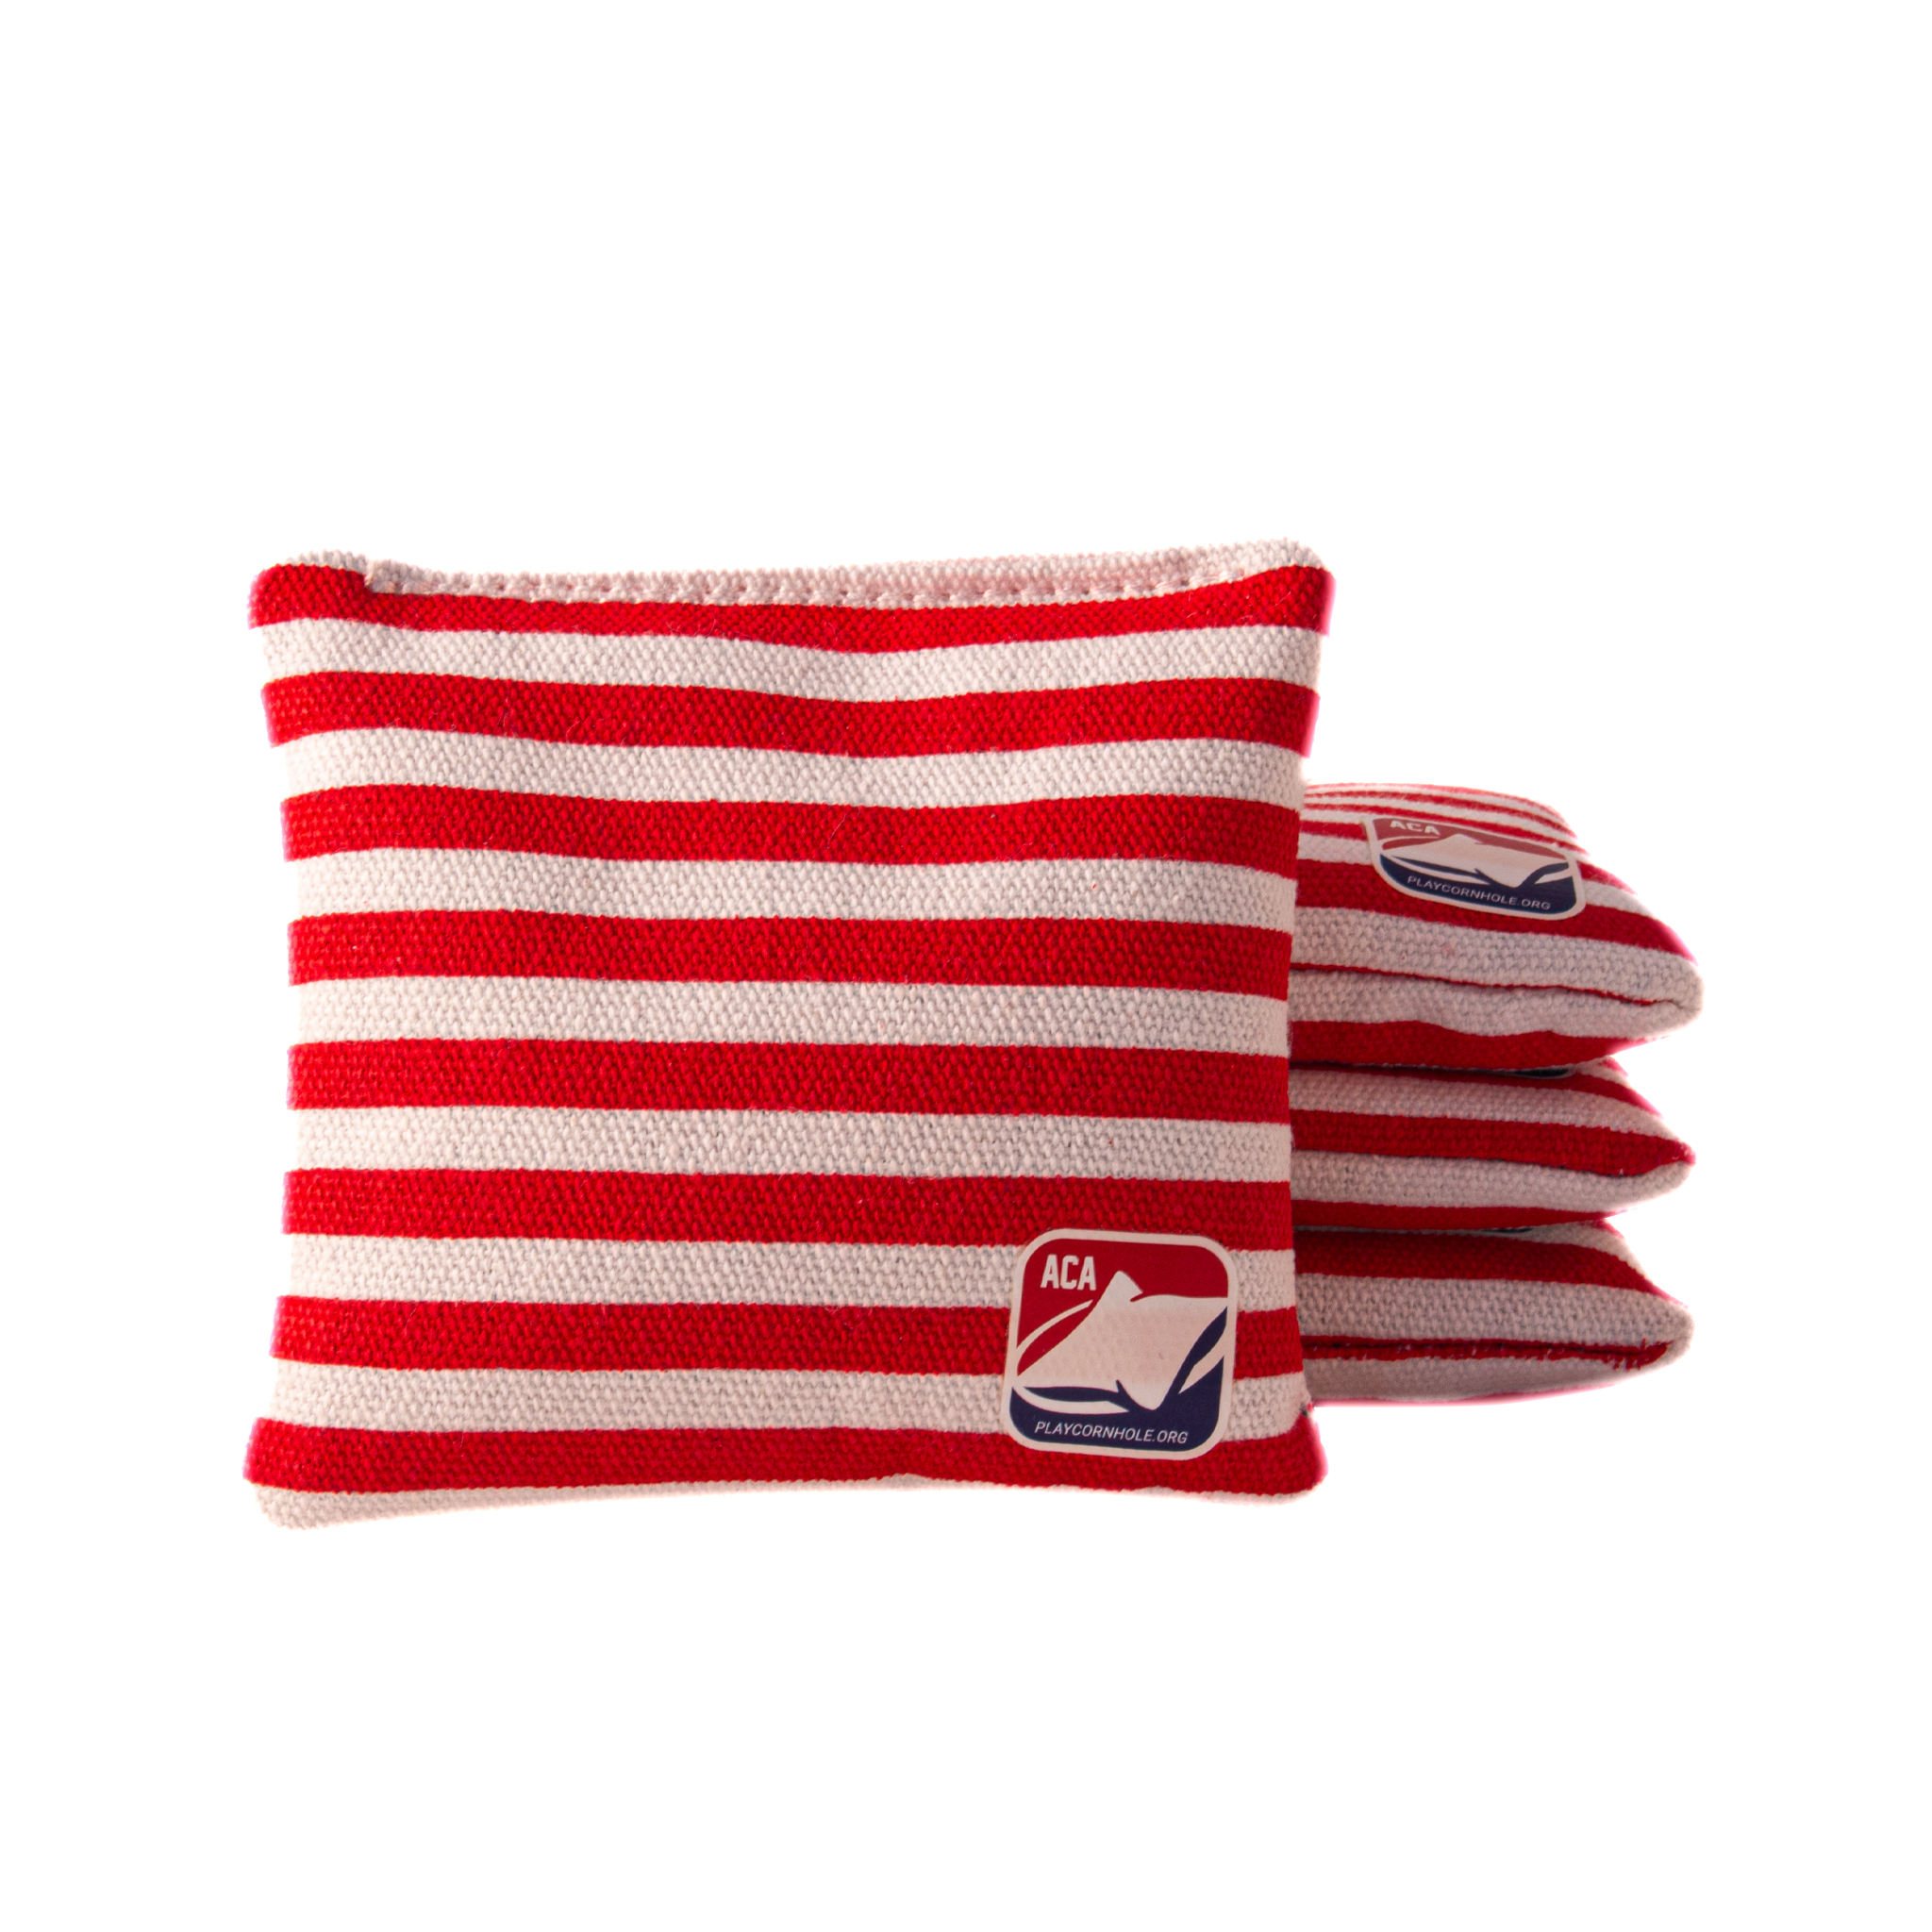 4-in Daily 44x Stripes Recreational Cornhole Bags